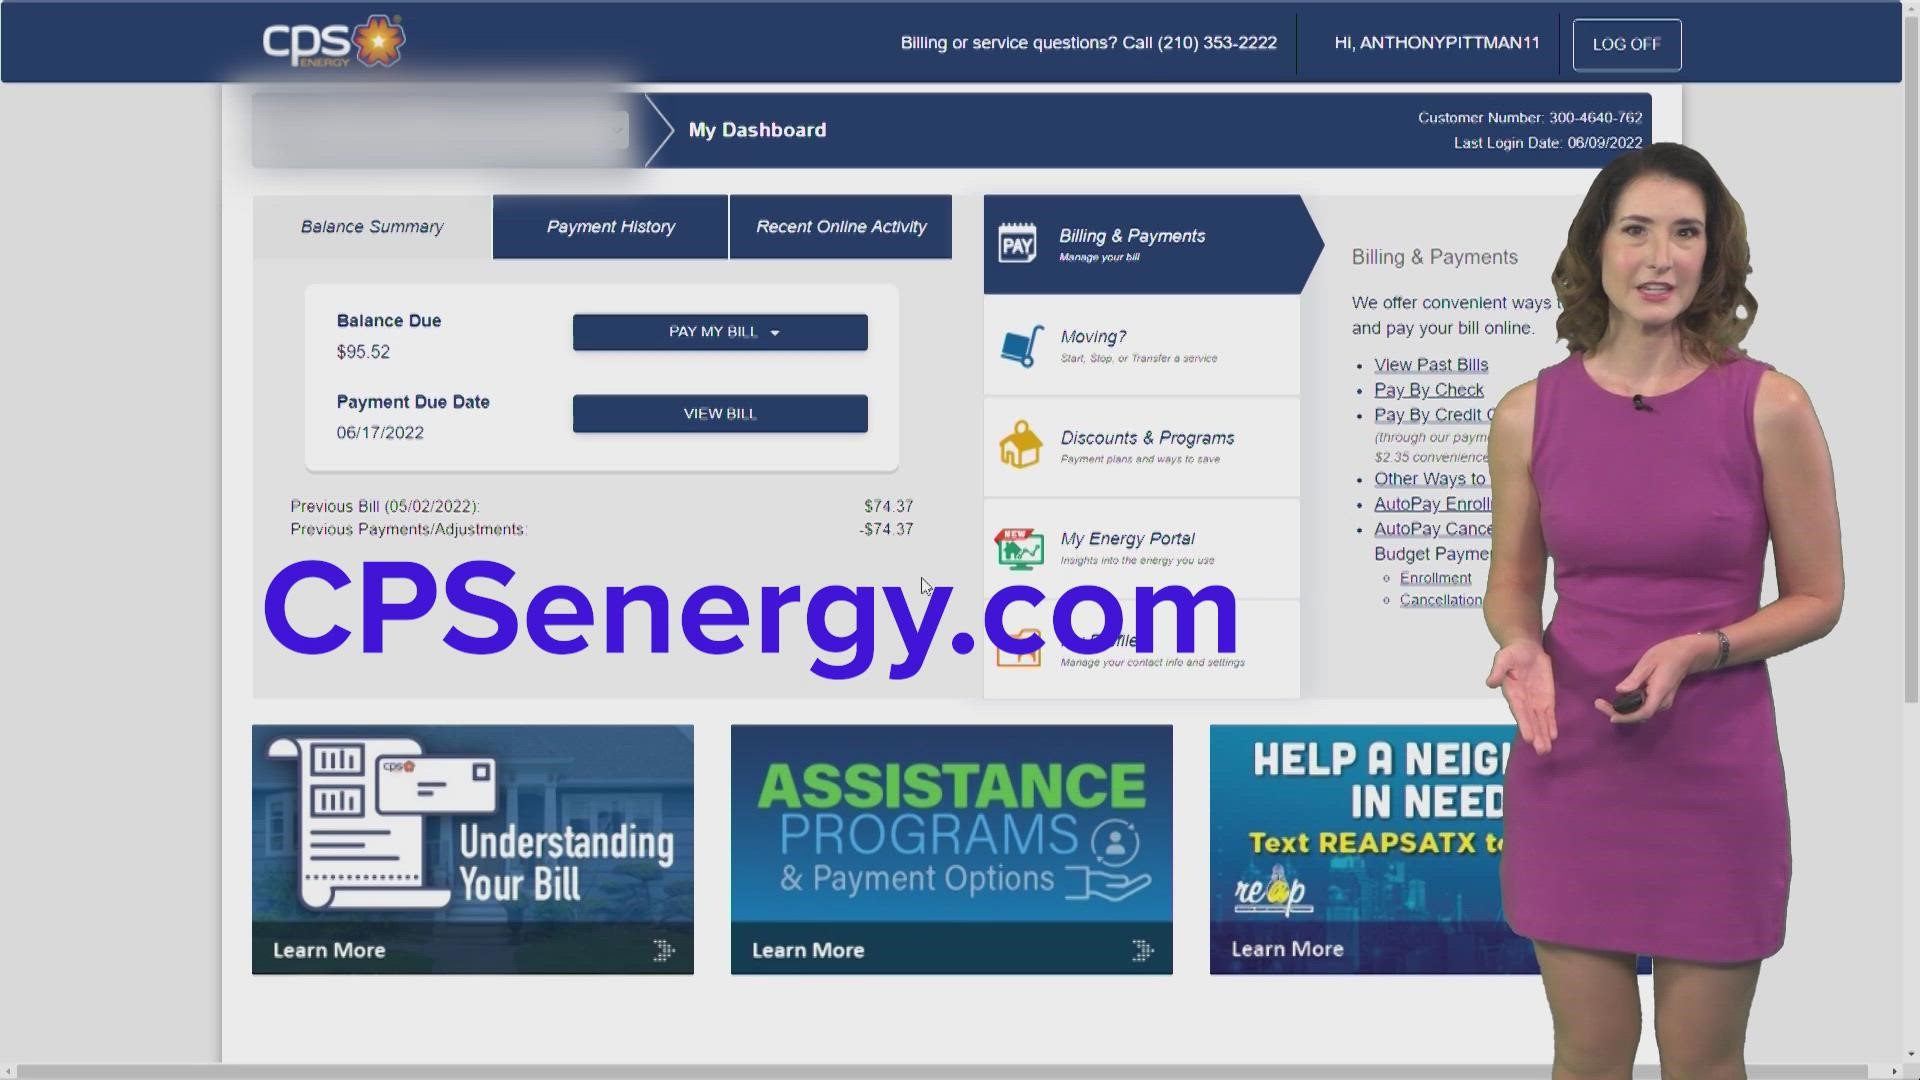 The CPS Energy online portal offers tips and ways to save energy, which will ultimately save you money.